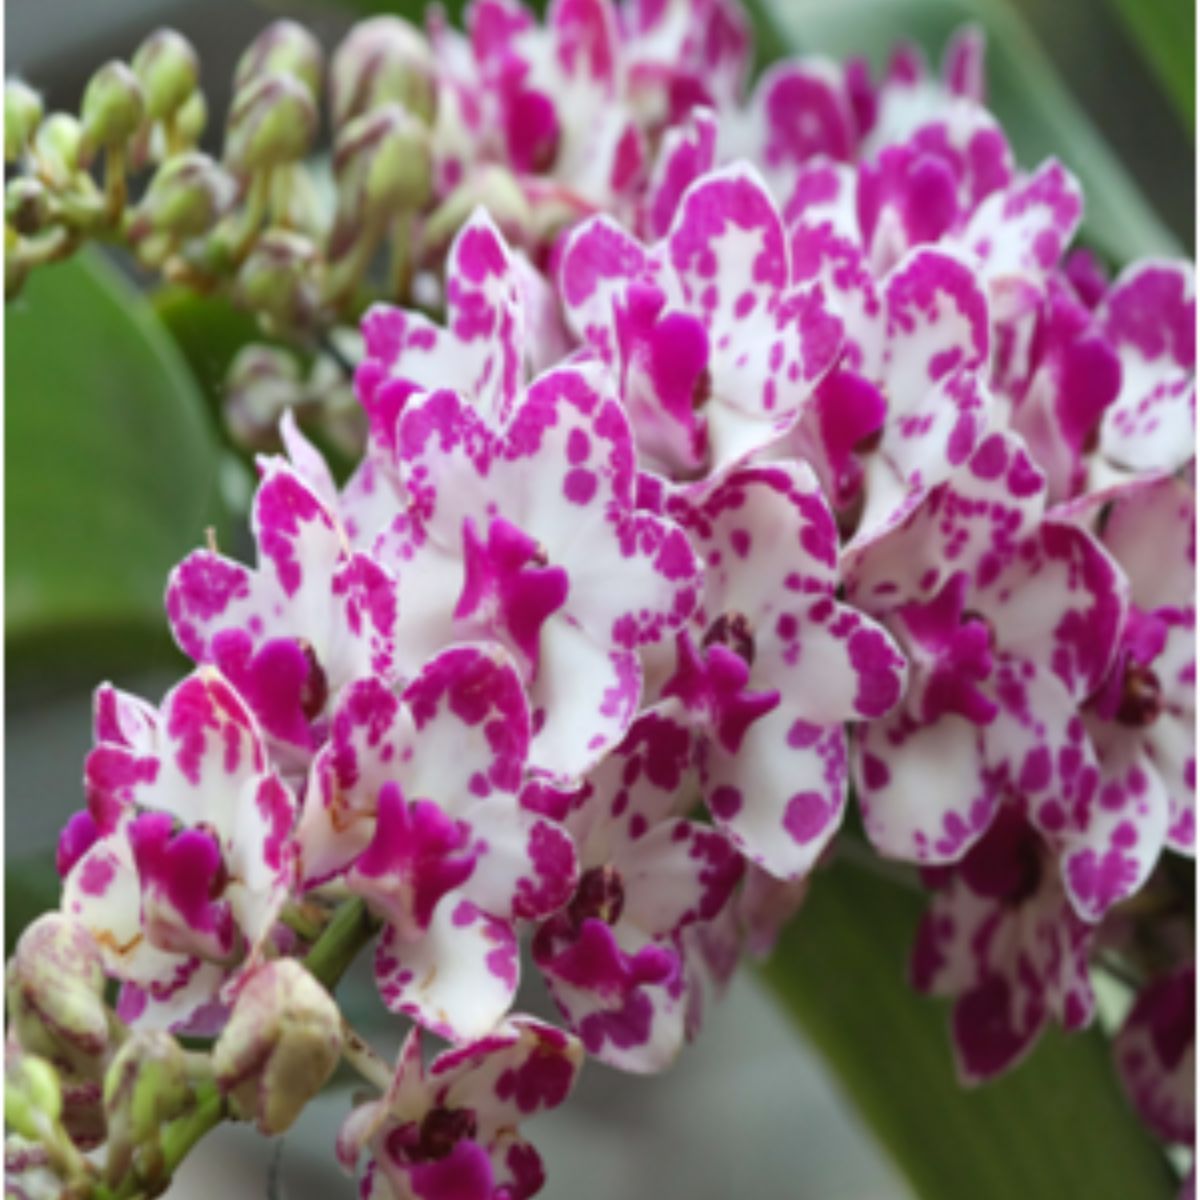 Rhynchostylis Gigantea (Ply) Orchid - Blooming beauty in vibrant shades of pink and white.